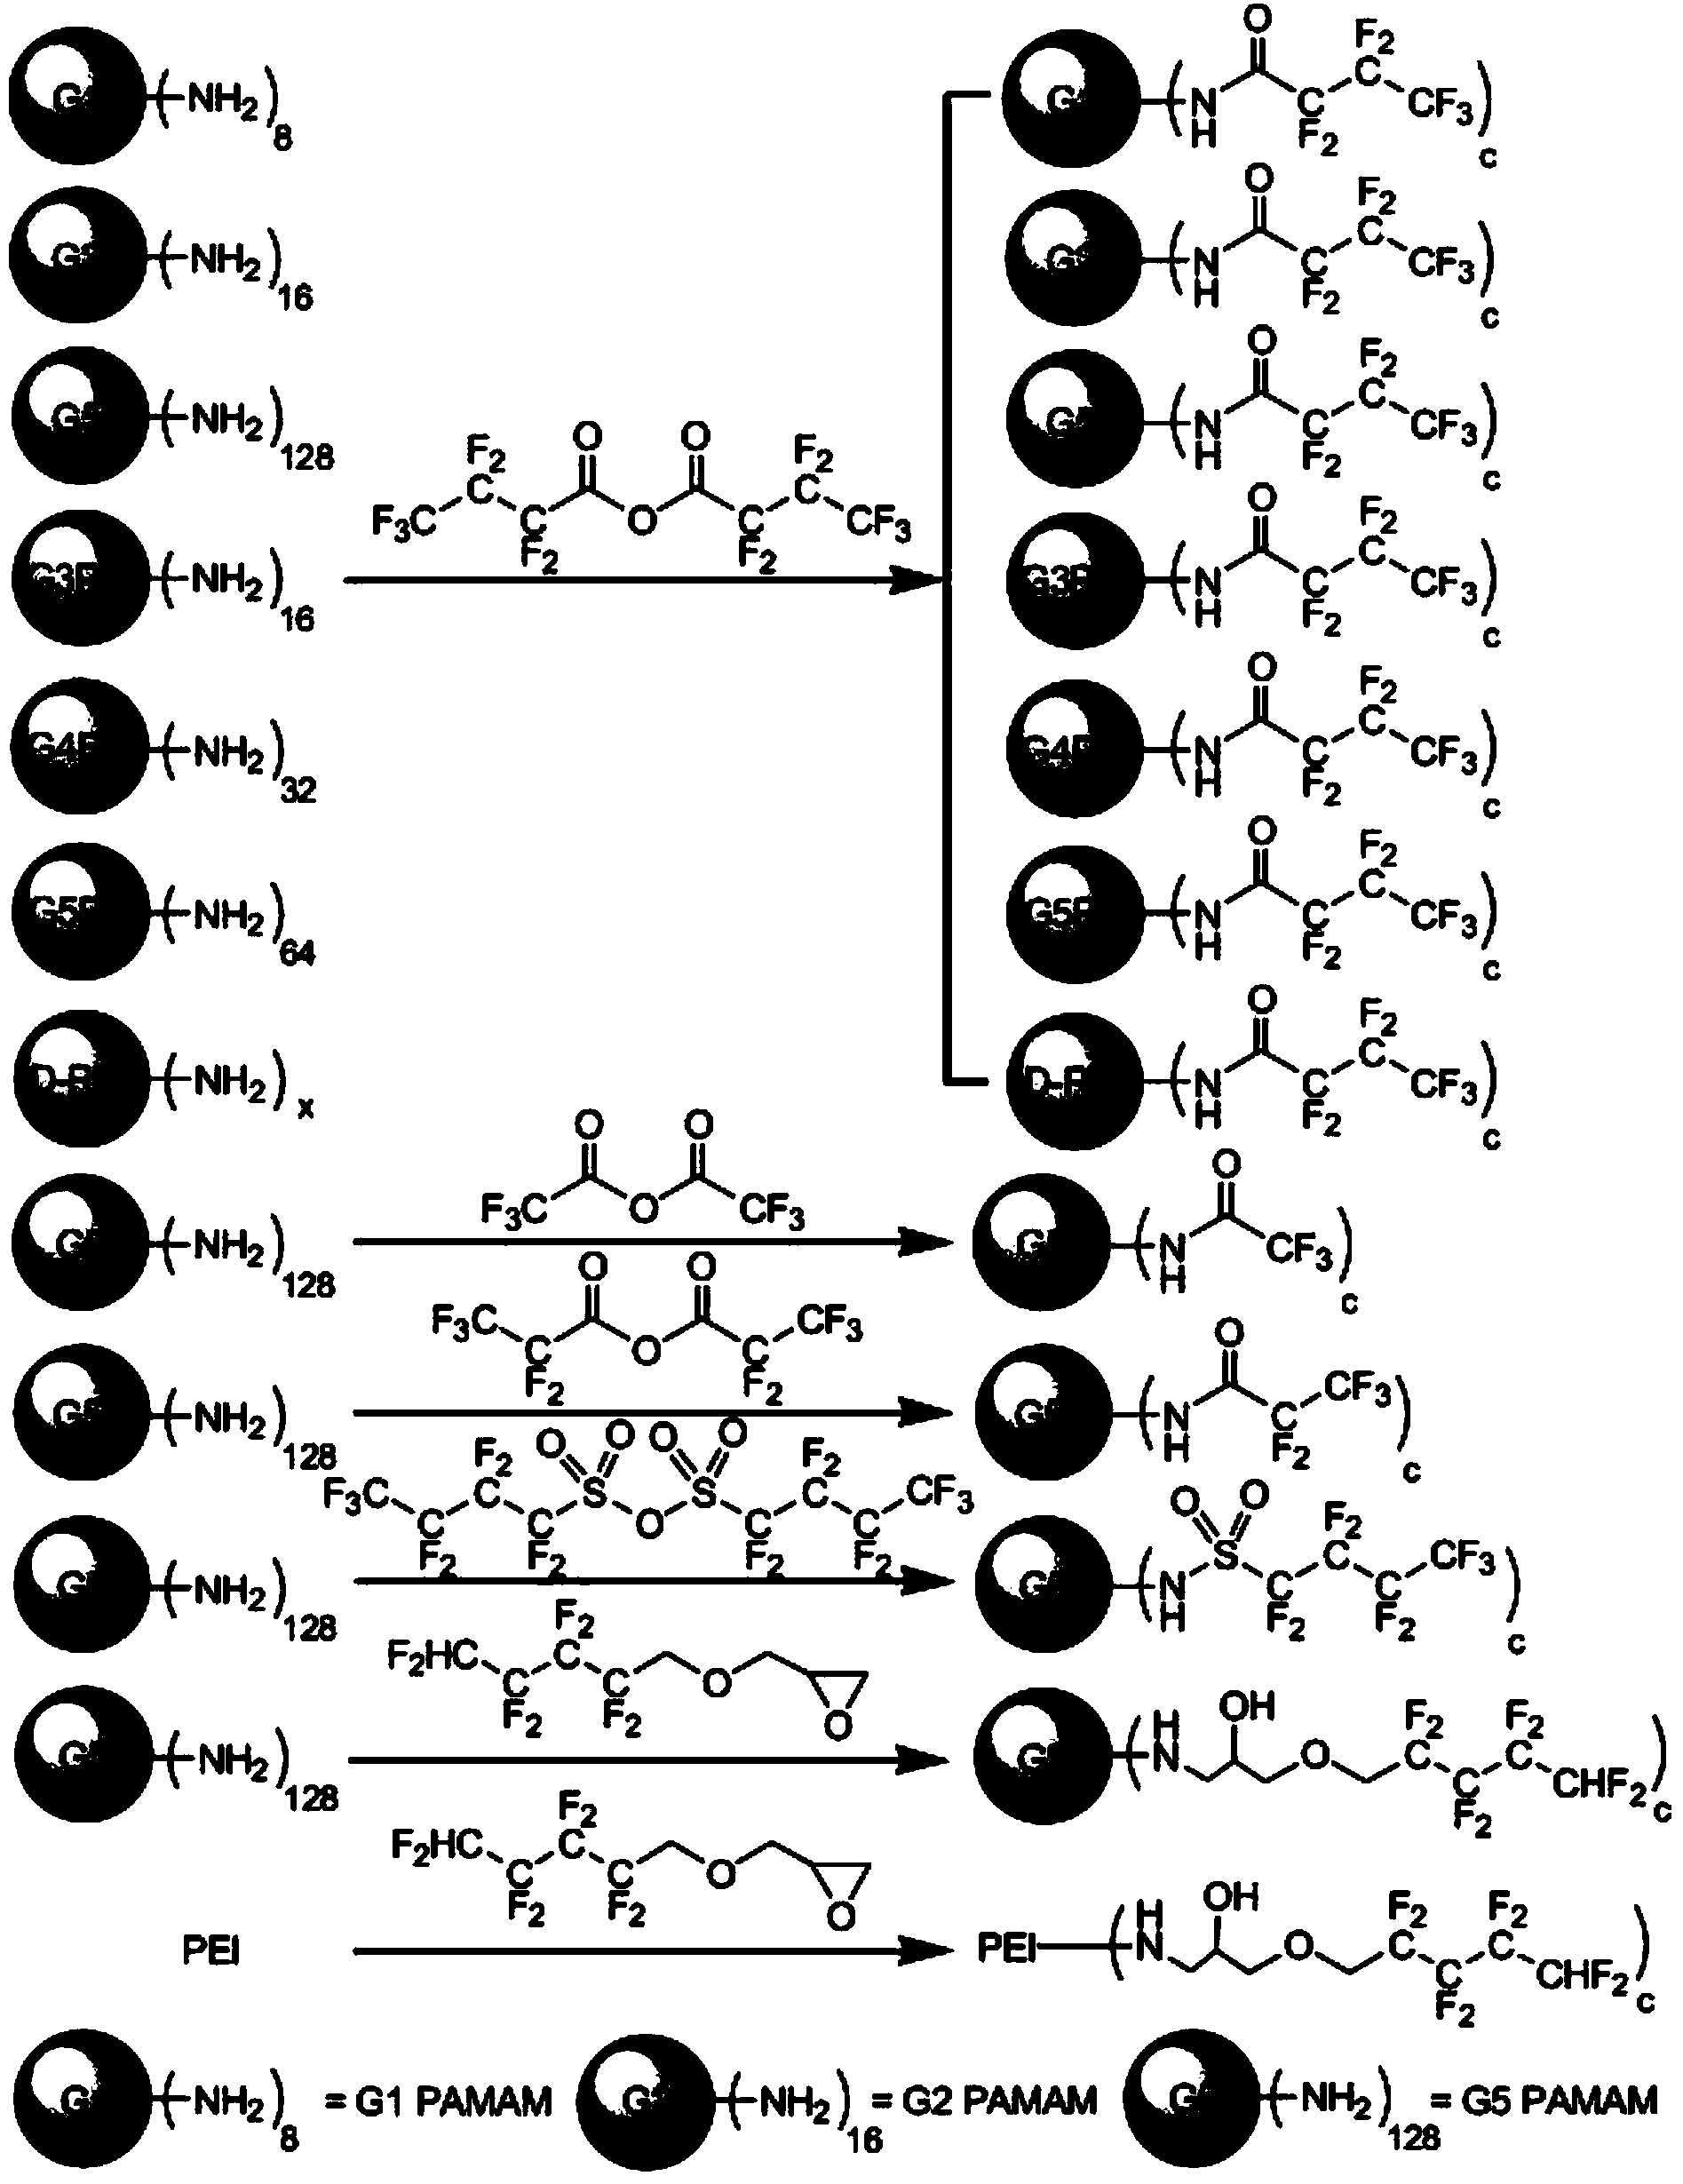 Fluorine-containing aliphatic chain-modified cationic polymer and application of fluorine-containing aliphatic chain-modified cationic polymer as gene carrier